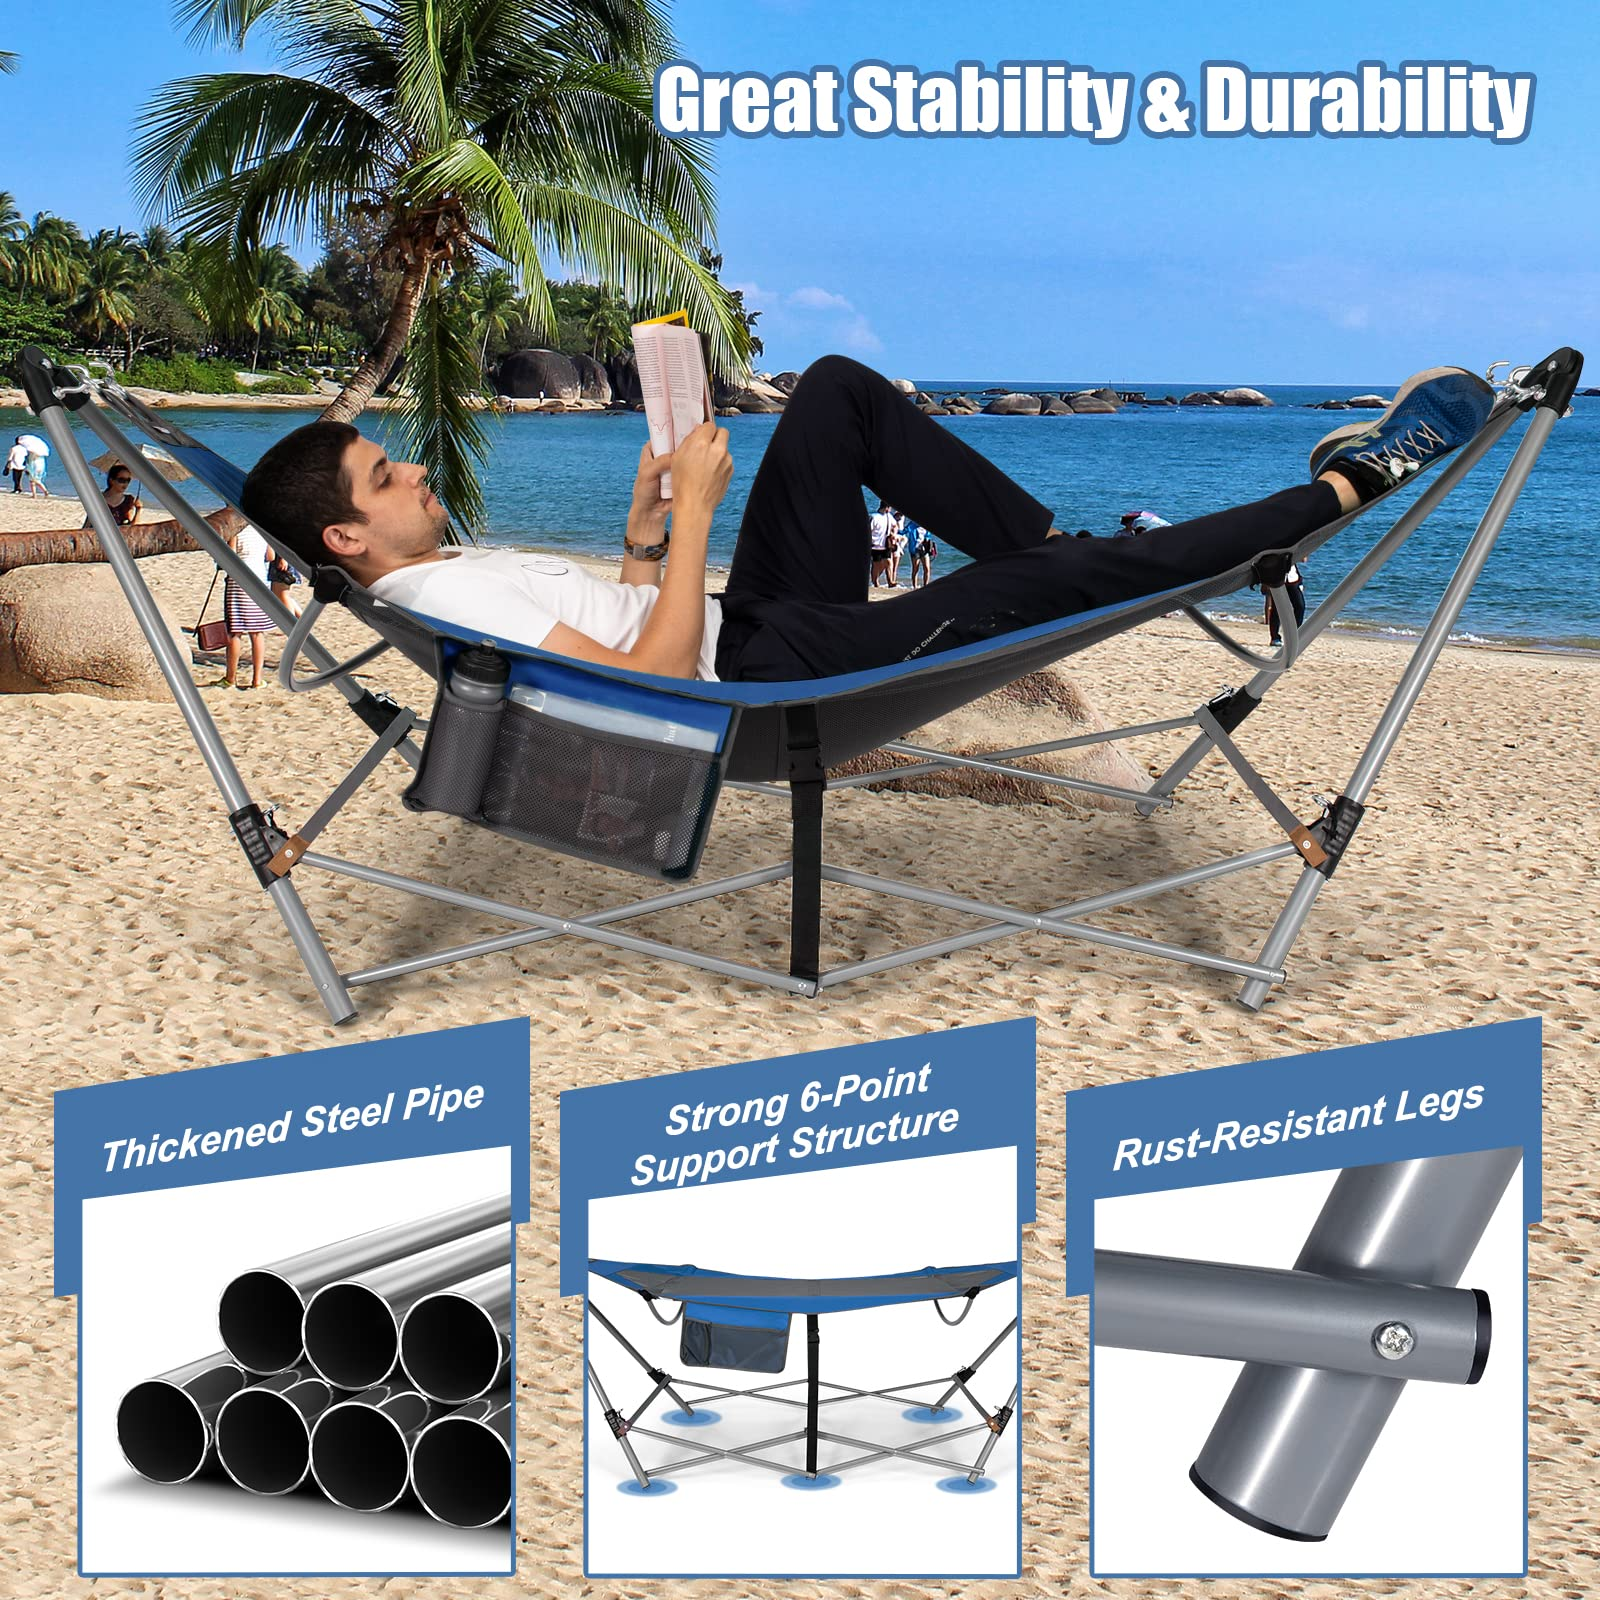 Giantex Portable Folding Hammock, Lounge Camping Bed with Hammock Stand